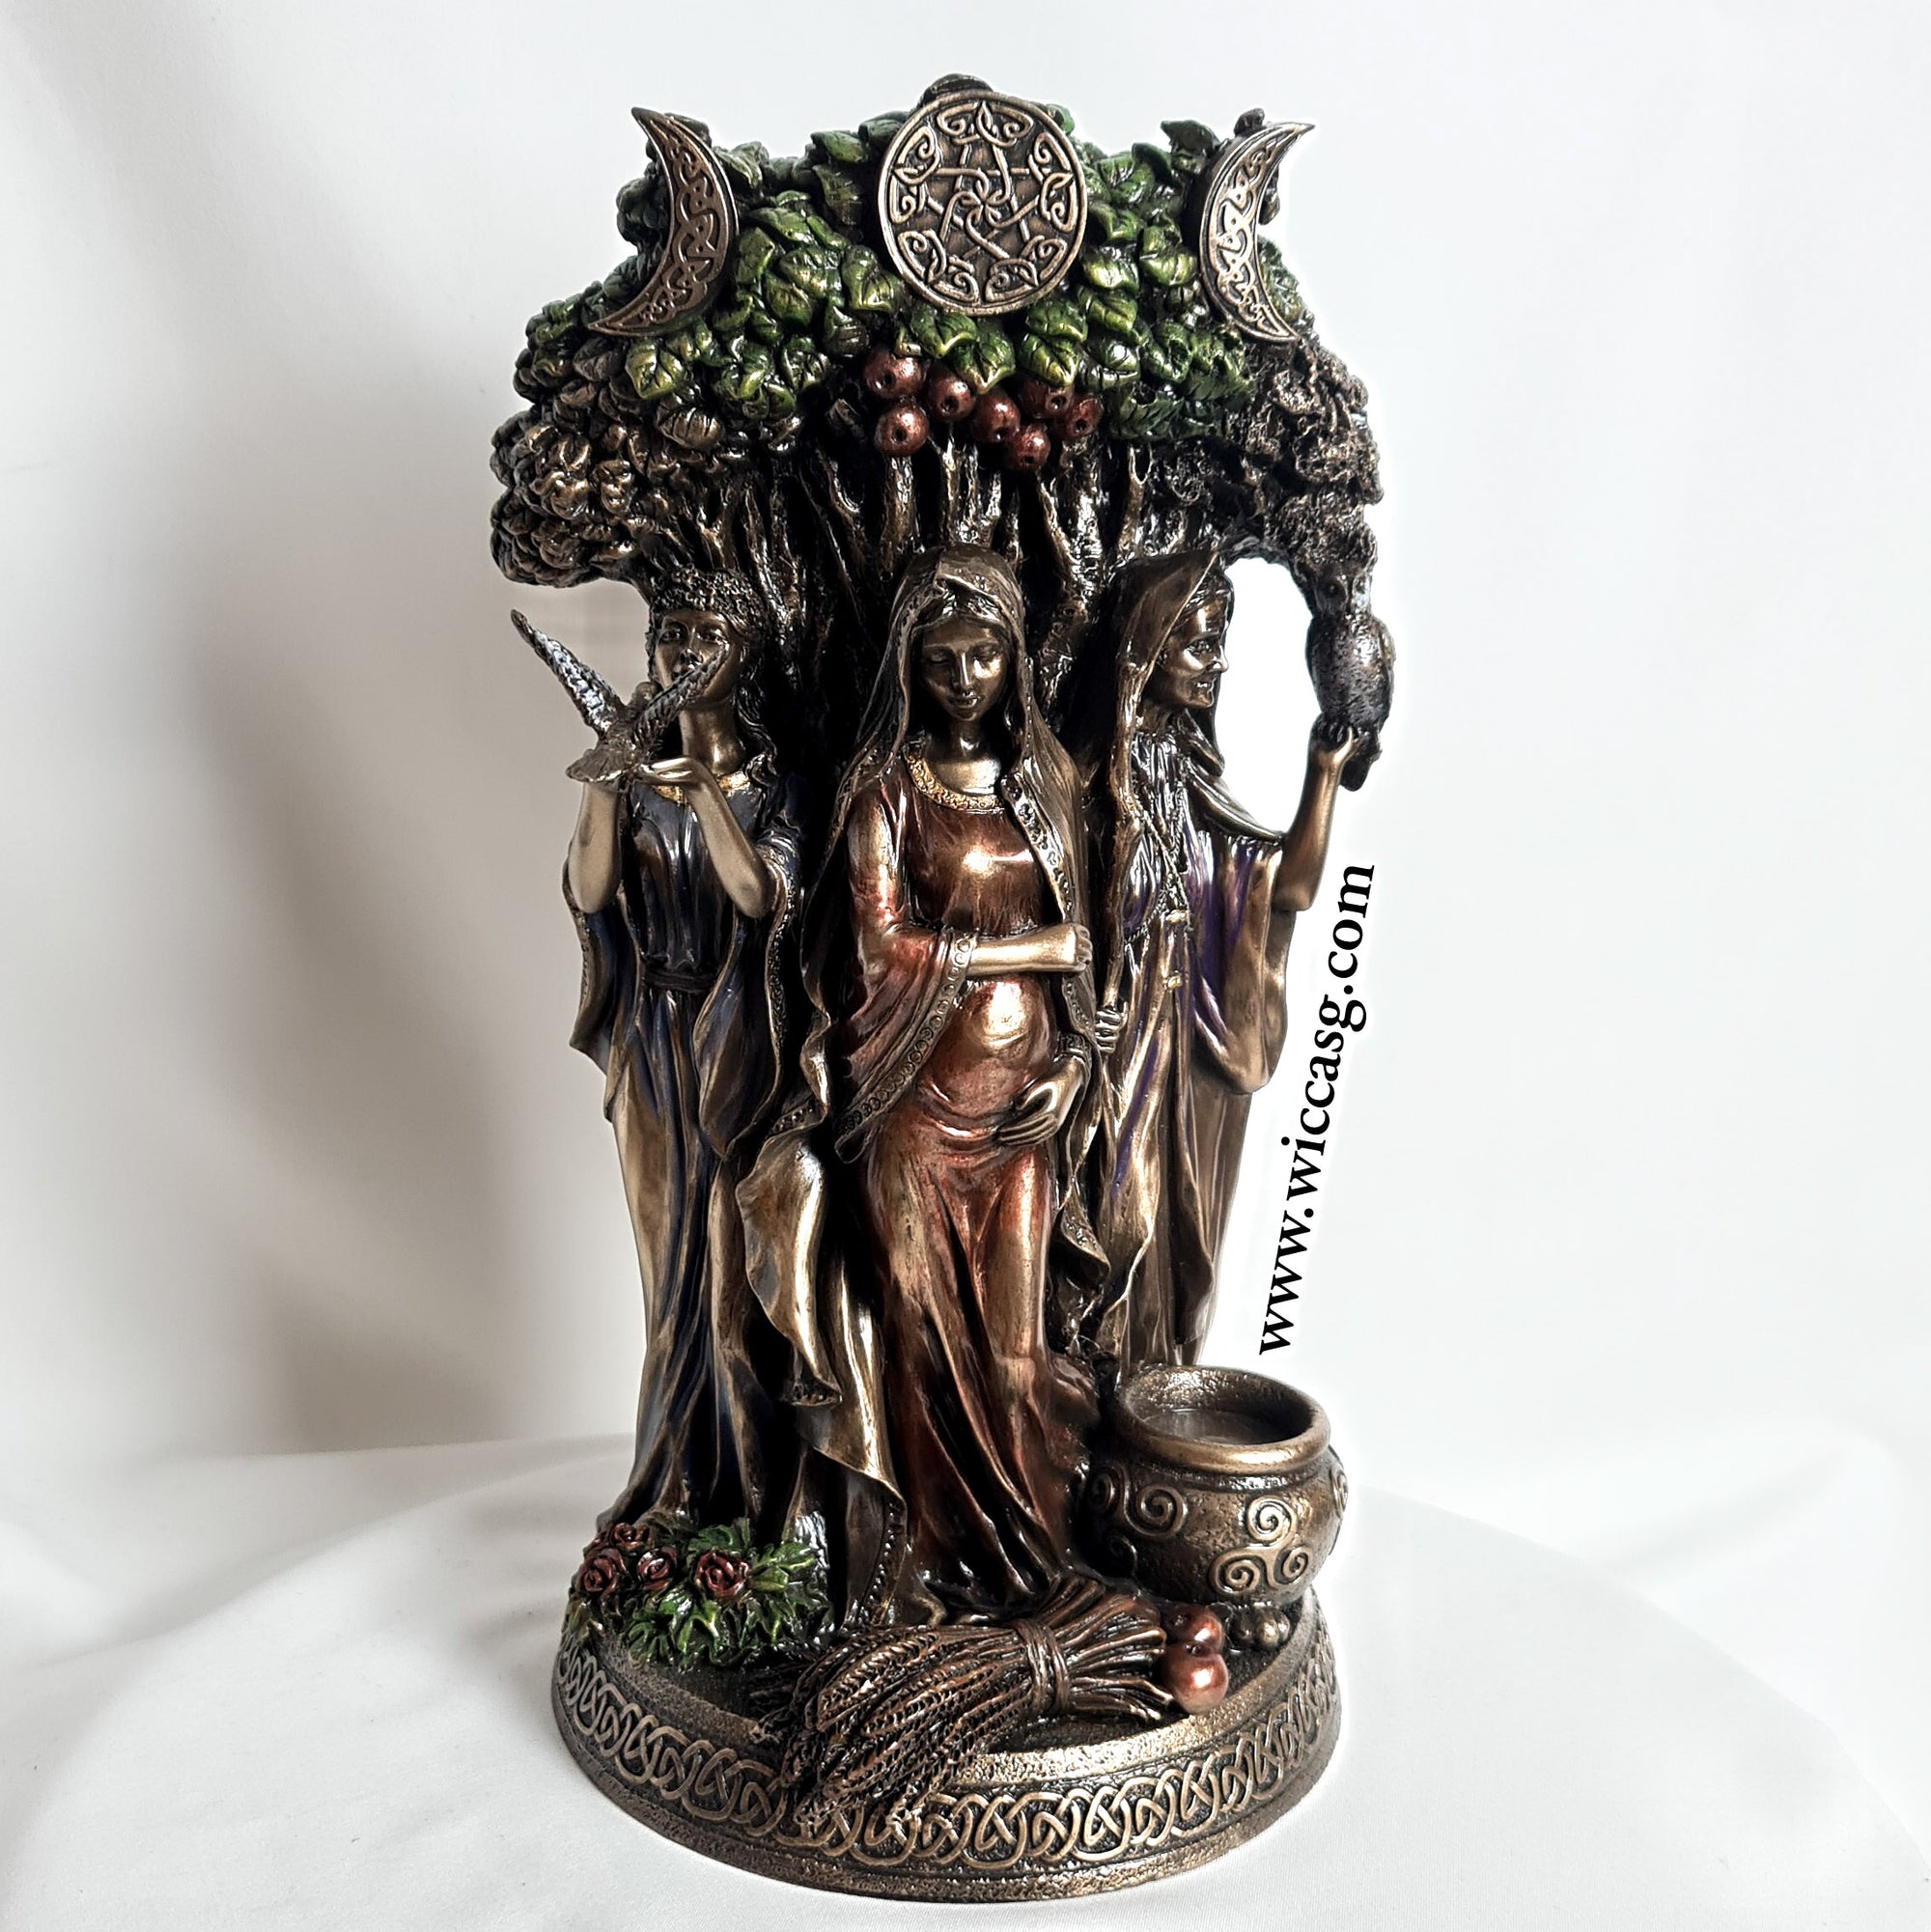 Mother, Maiden, Crone (Hecate)